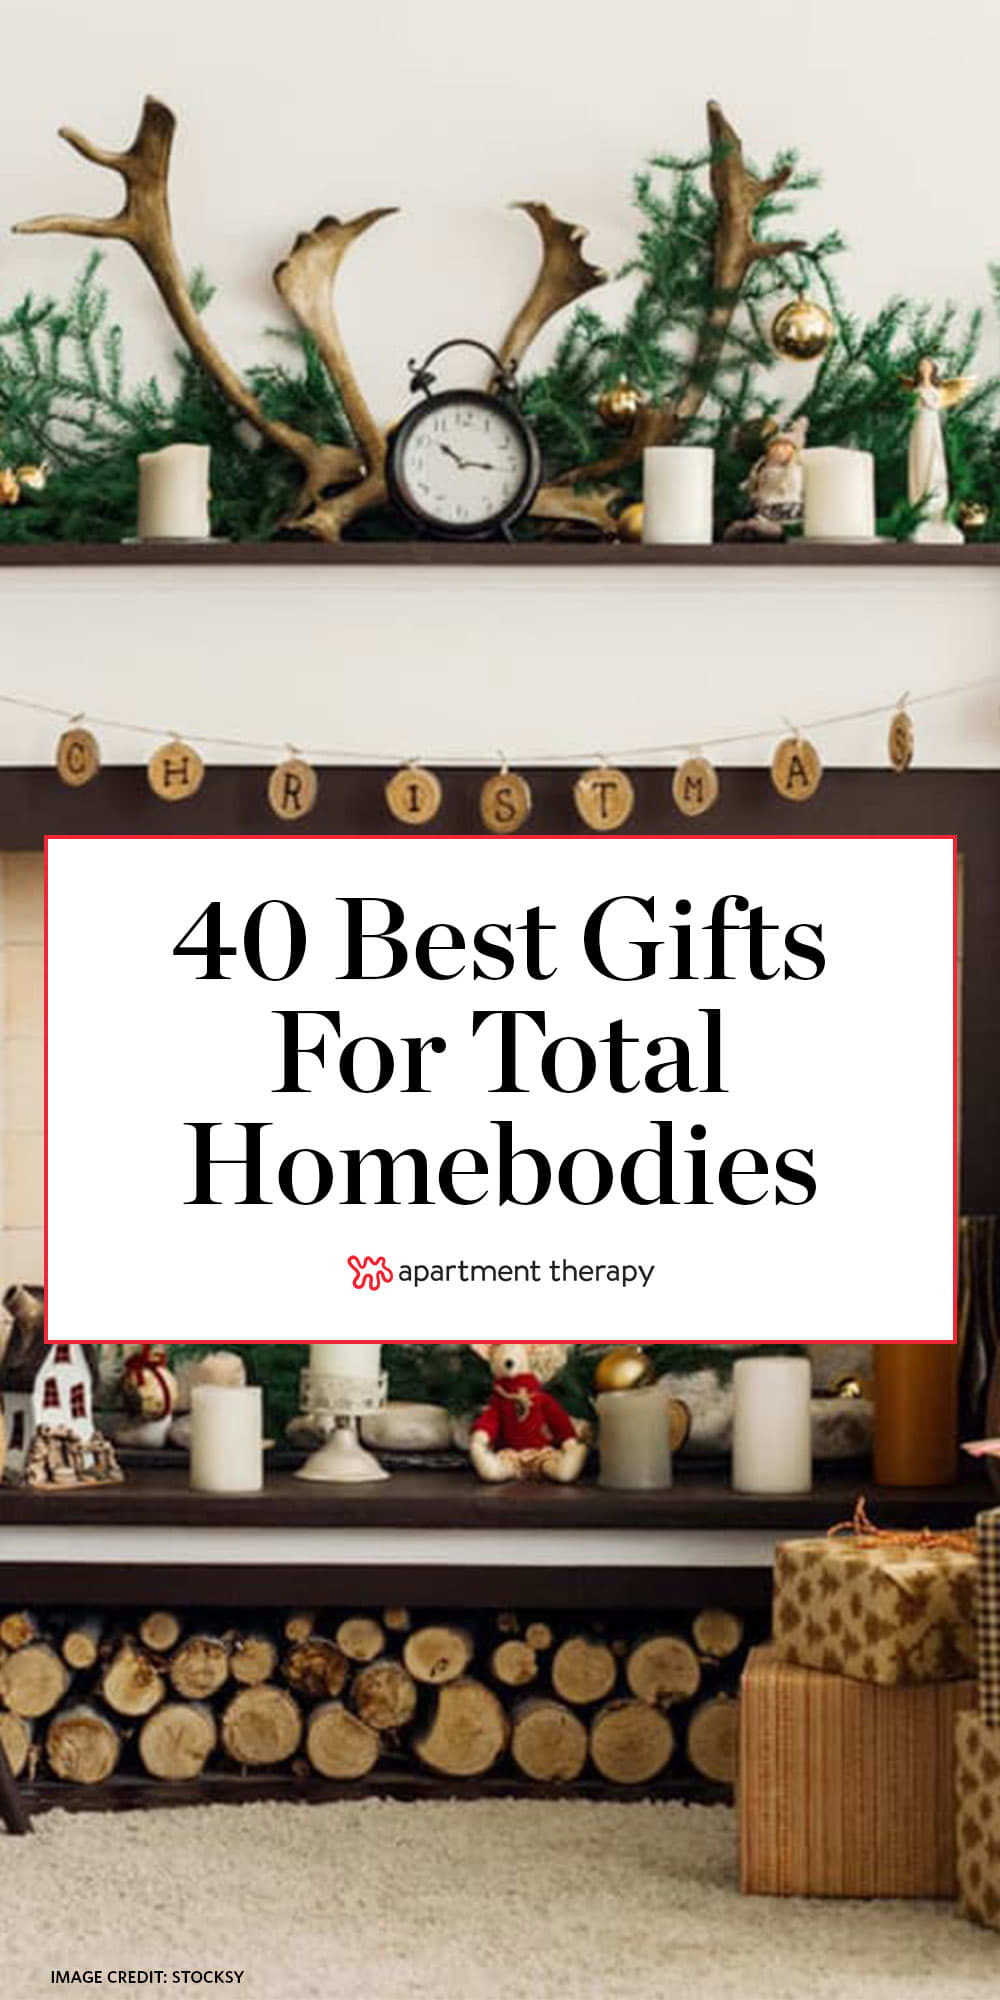 gifts for homebody parents